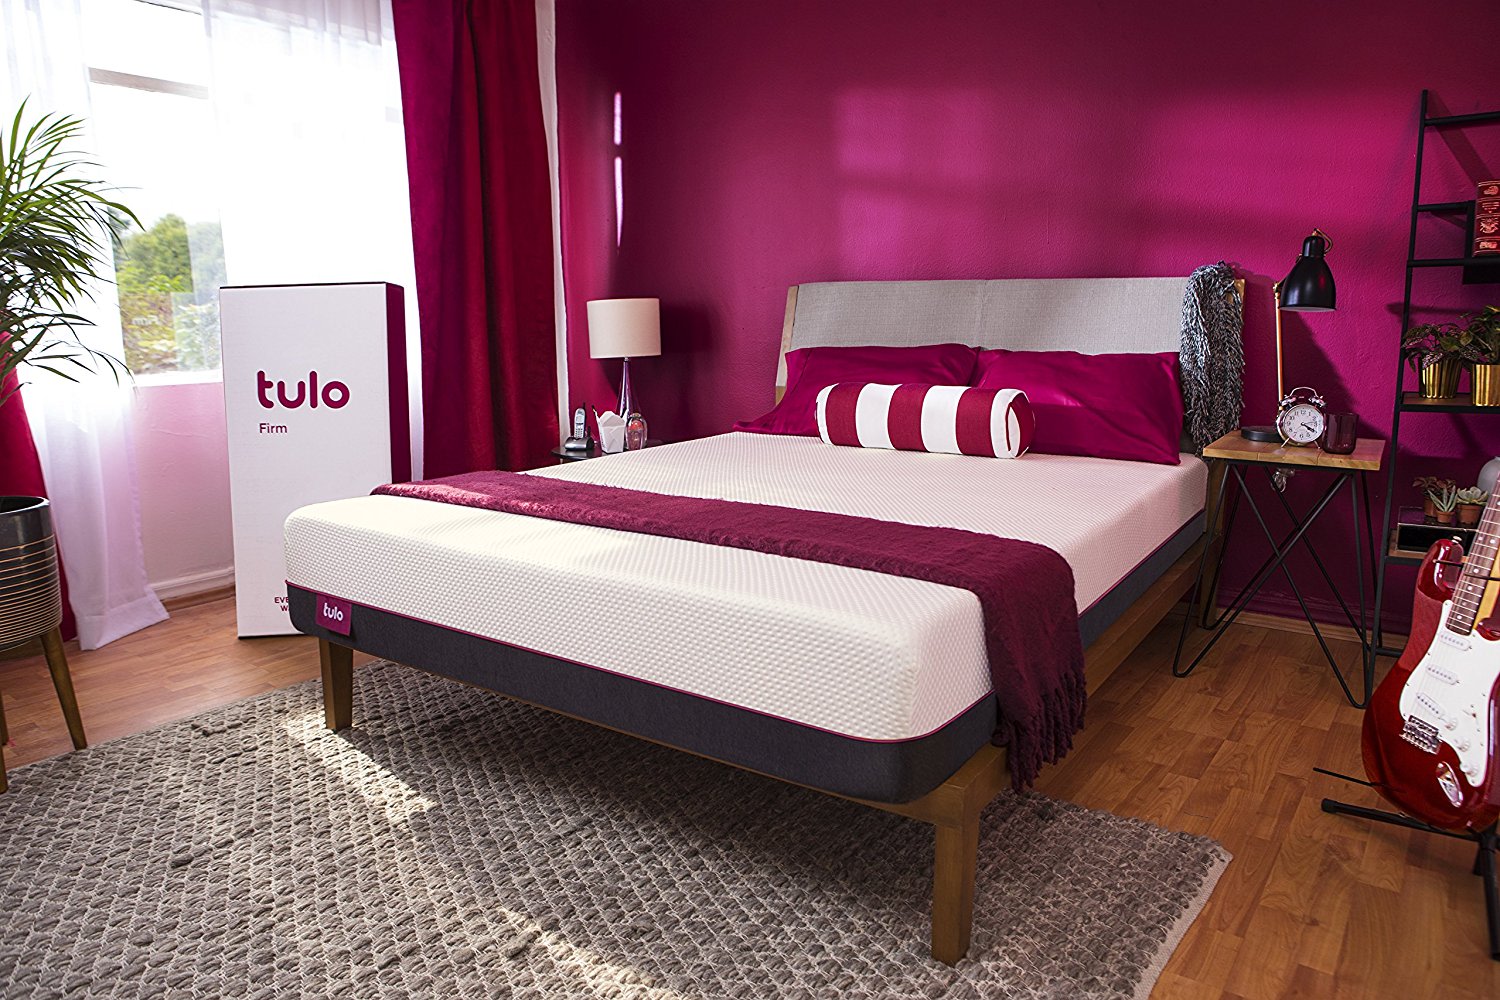 An image related to Tulo Firm Memory Foam Twin-Size 10-Inch Mattress